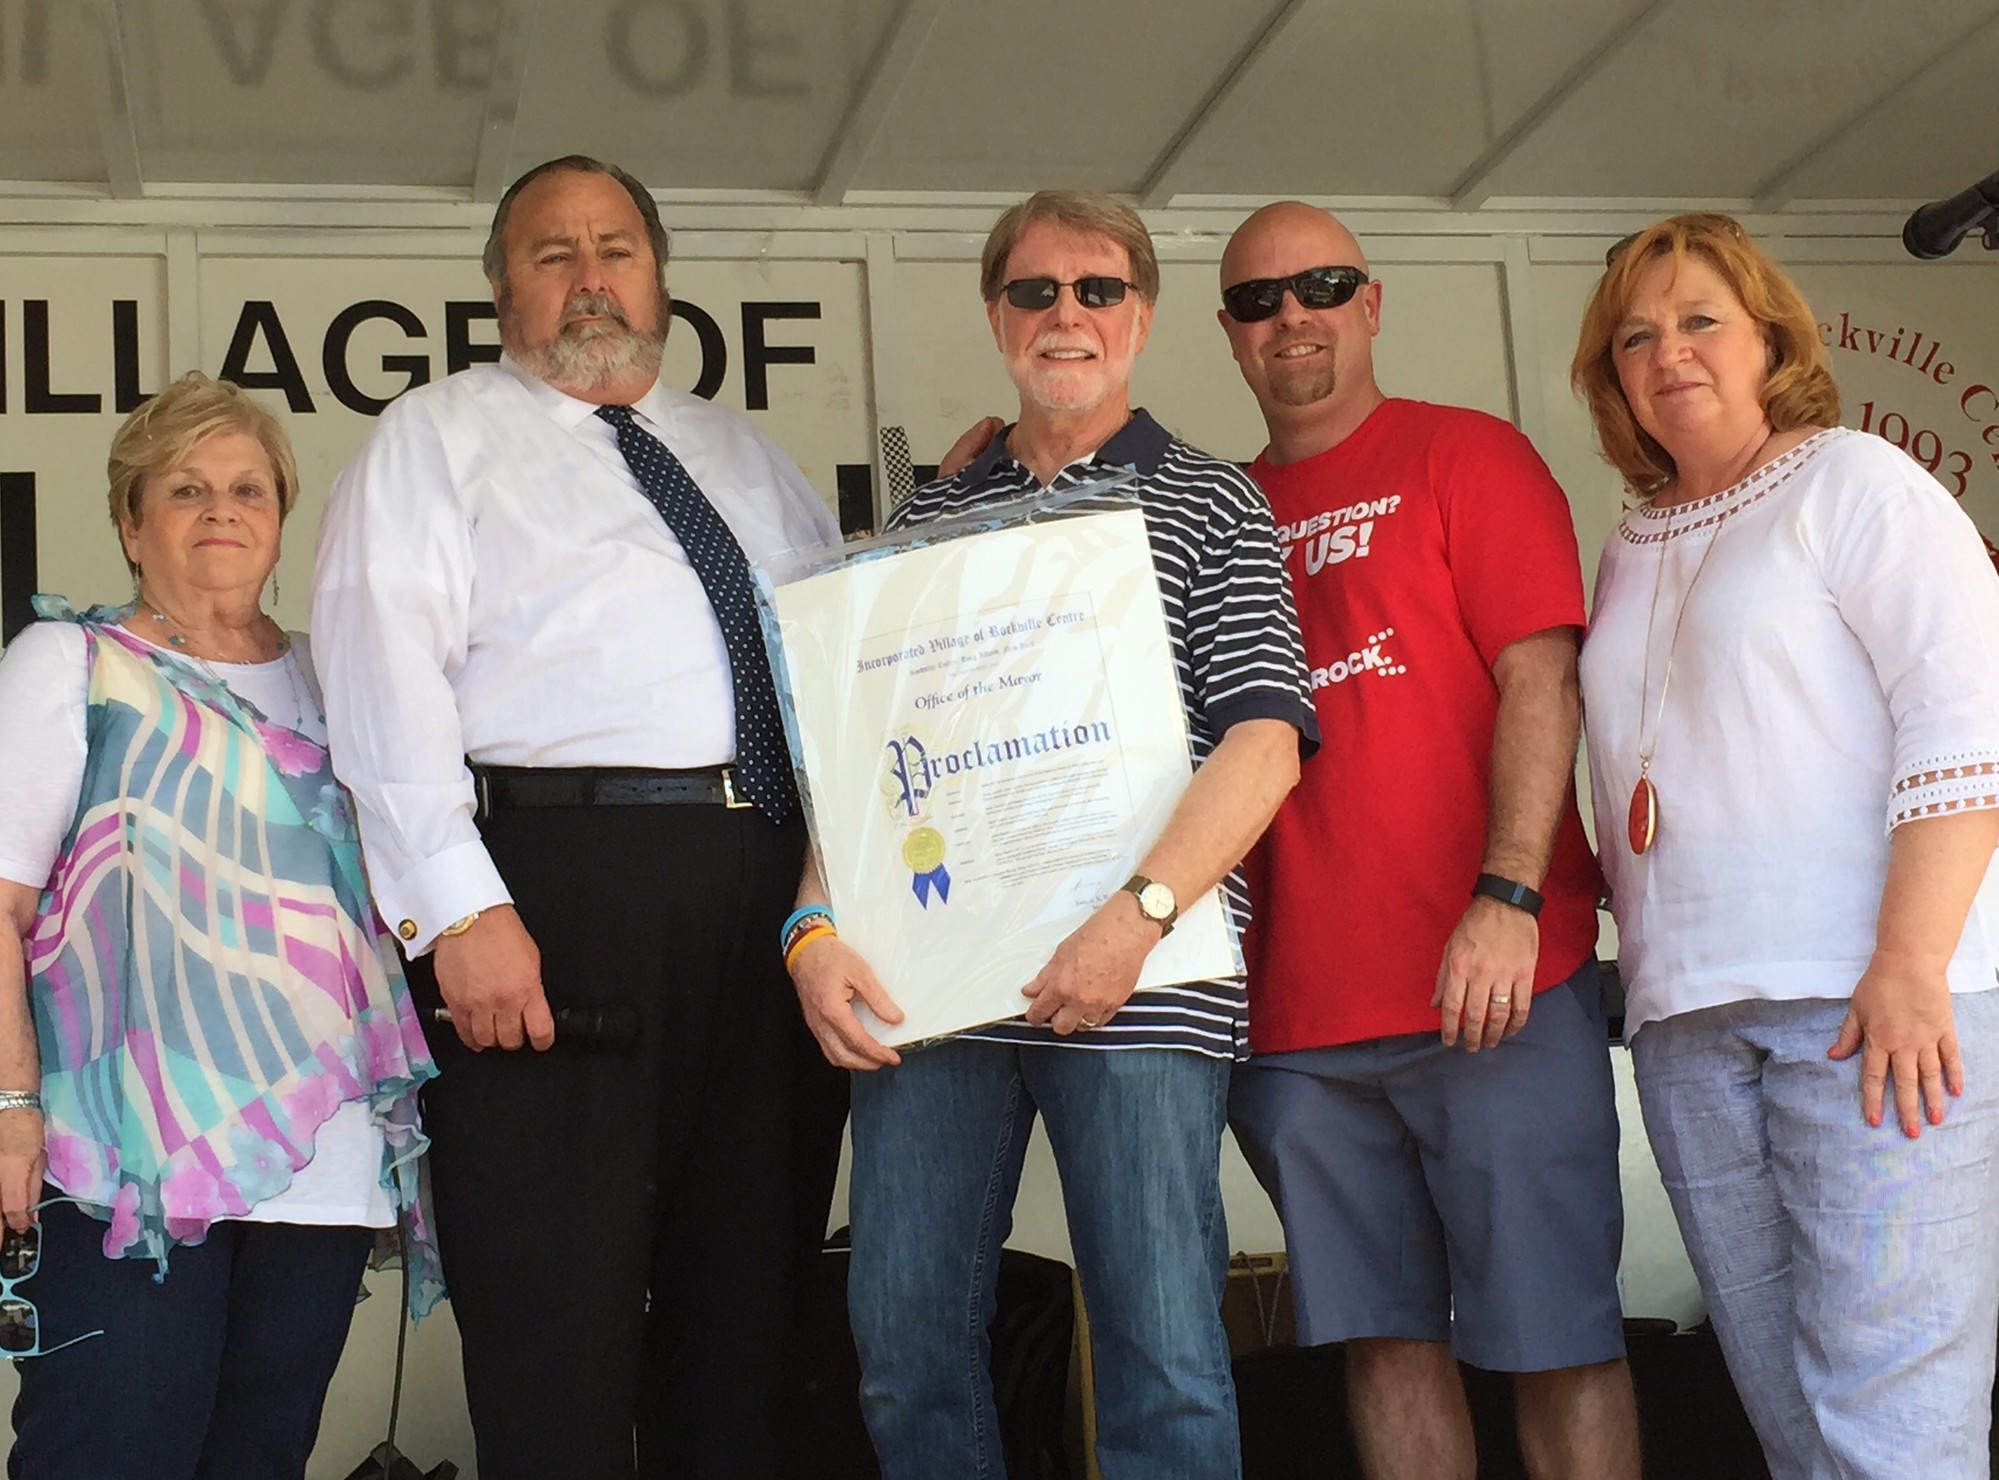 Jess Resnick, center, accepted a proclamation honoring his wife, Karen, from Chamber President Barbara Goldfeder, left, Mayor Francis X. Murray, Chamber Vice President Greg Schaefer and Deputy Mayor Nancy Howard.